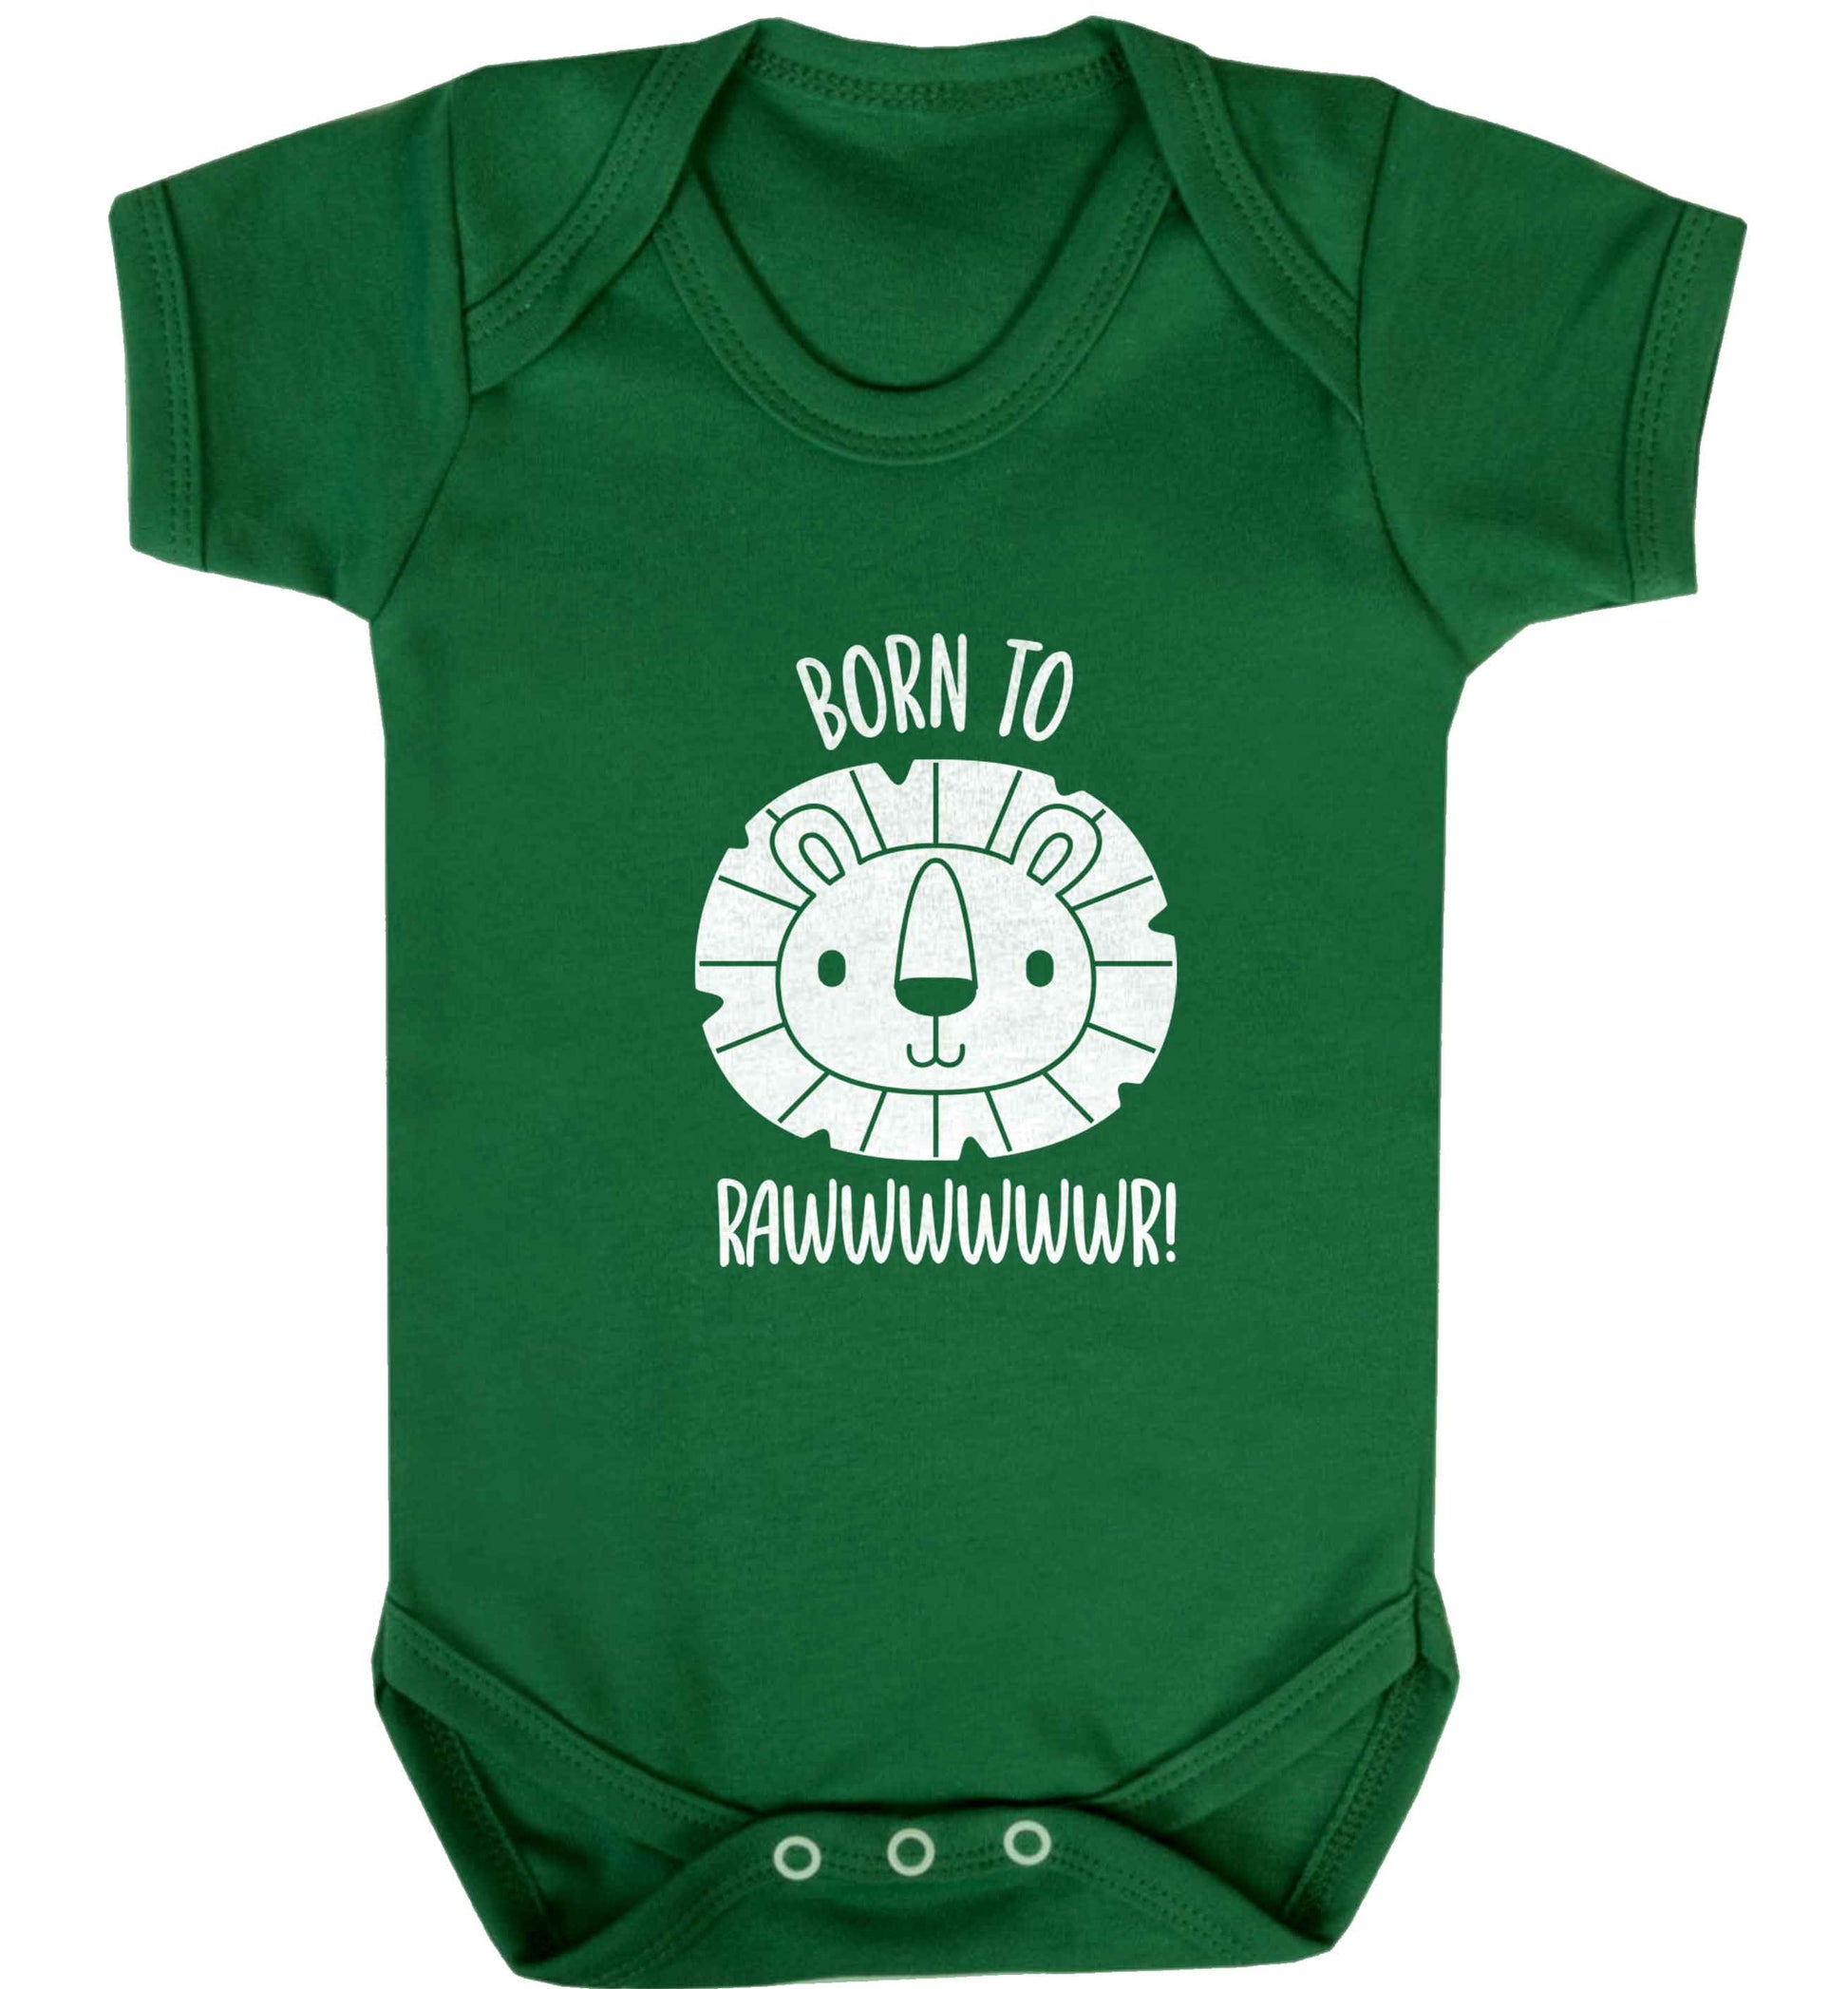 Born to rawr baby vest green 18-24 months